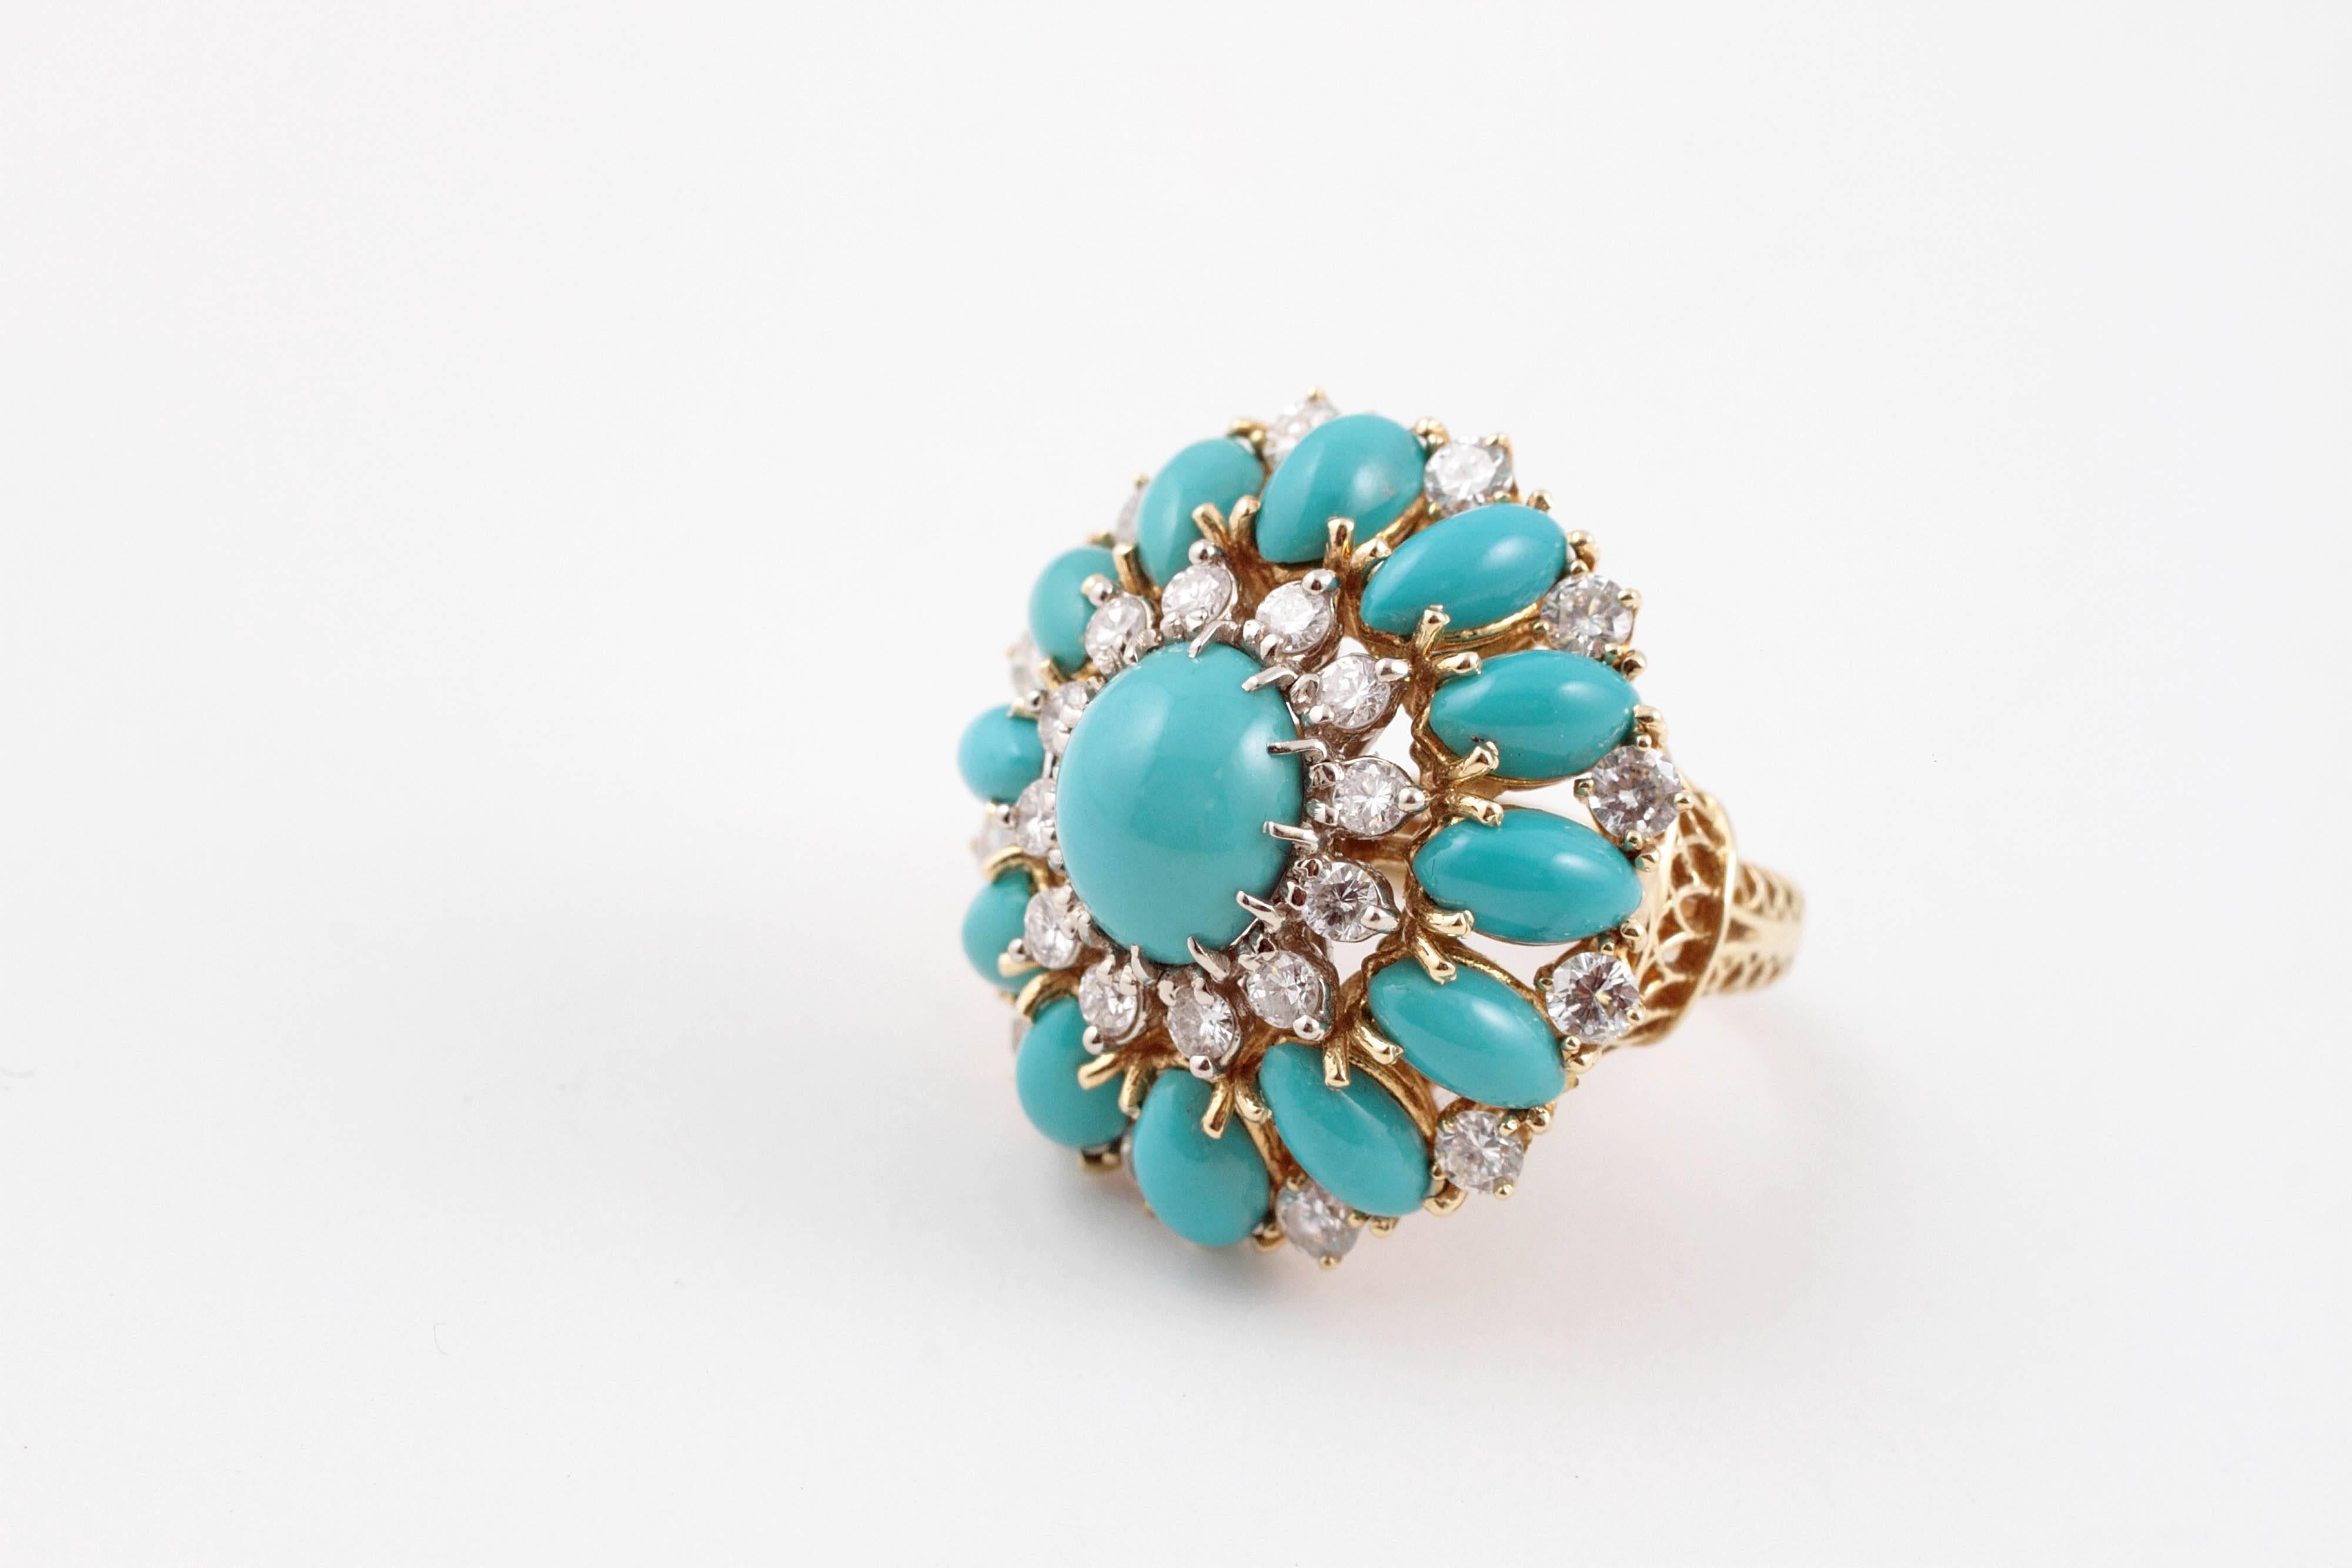 Turquoise lovers rejoice!  This exquisite natural turquoise and diamond ring in detailed 18 karat yellow gold mounting will be a fabulous addition to your jewelry collection.  Size 7 1/4. 